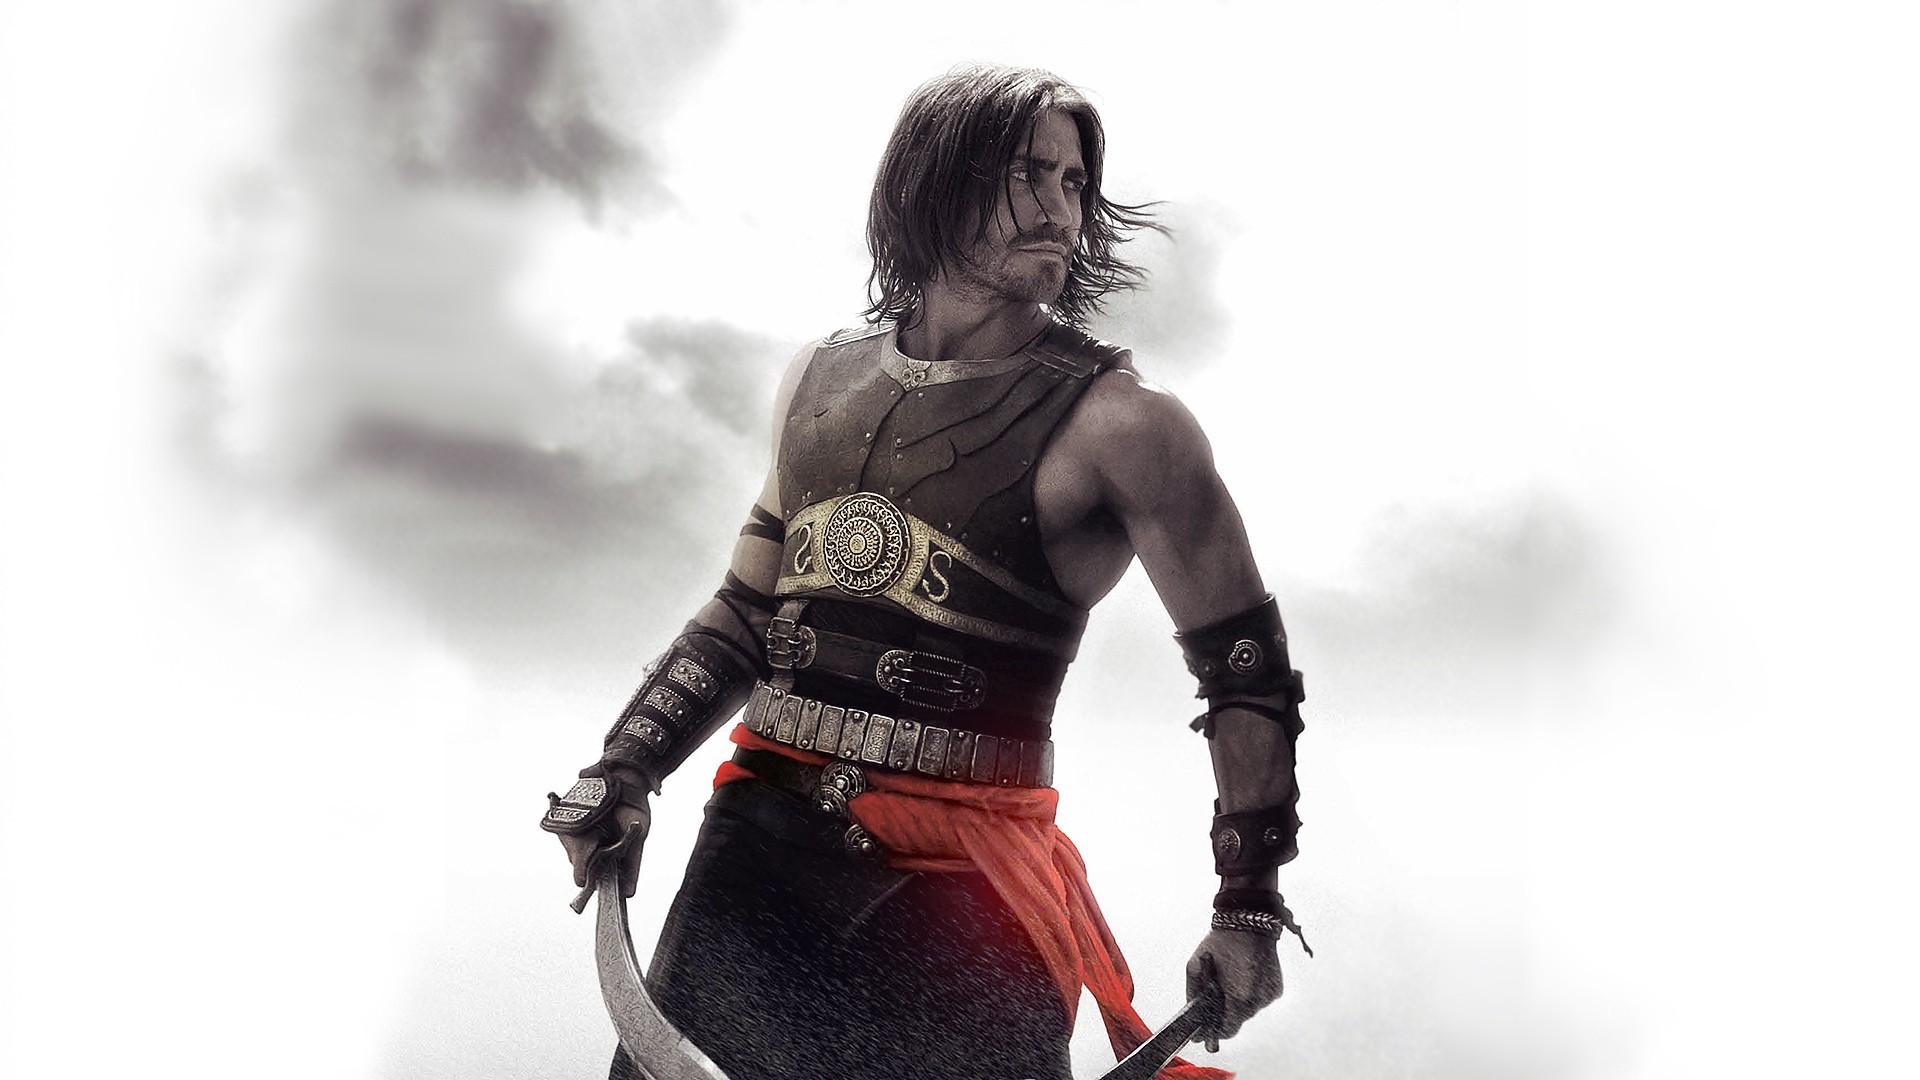 Jake Gyllenhaal, Prince Of Persia, Prince Of Persia: The Sands Of Time Wallpaper